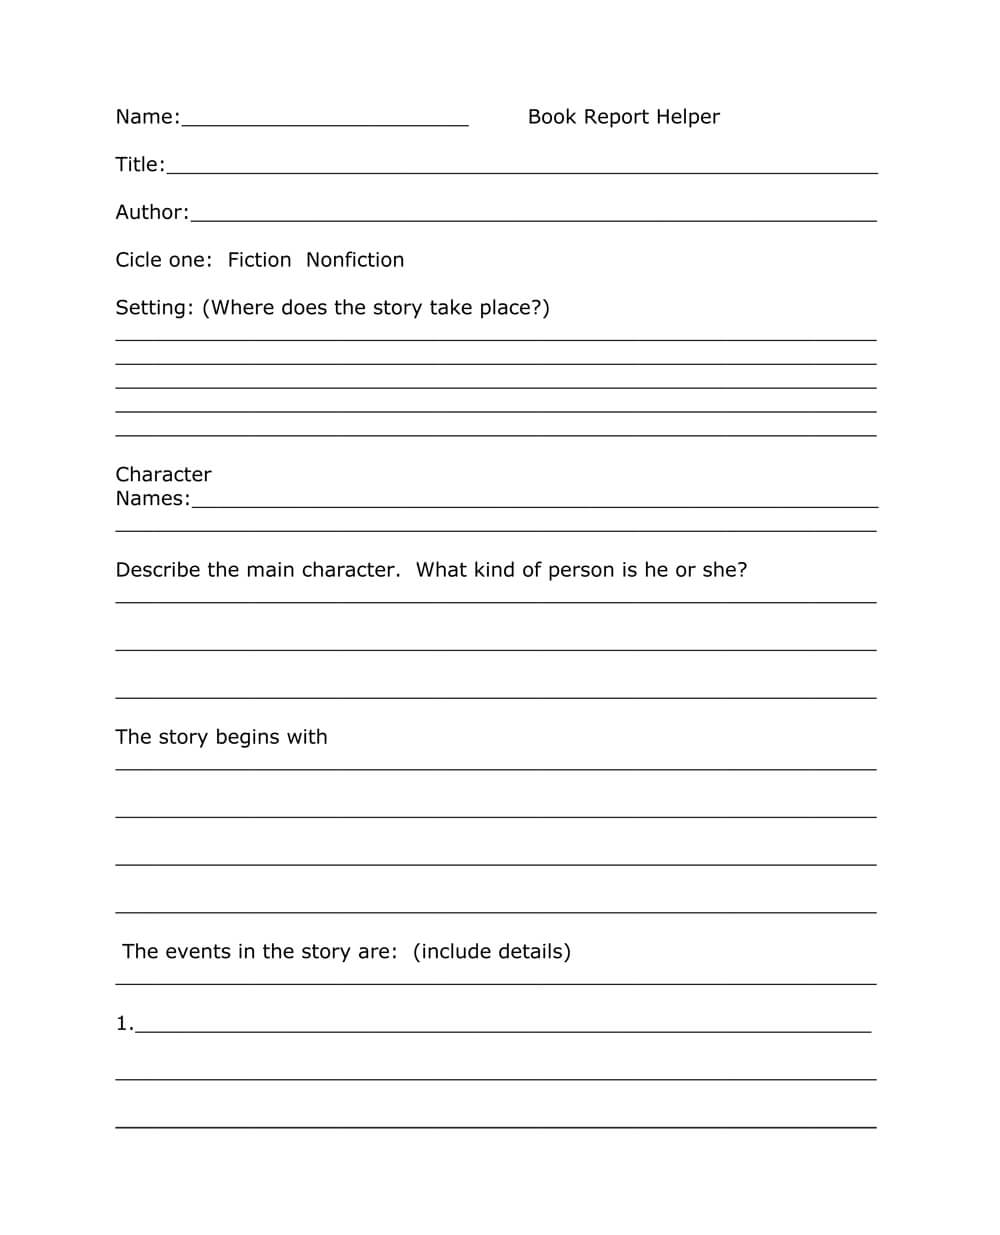 Book Report Templates From Custom Writing Service With Regard To One Page Book Report Template